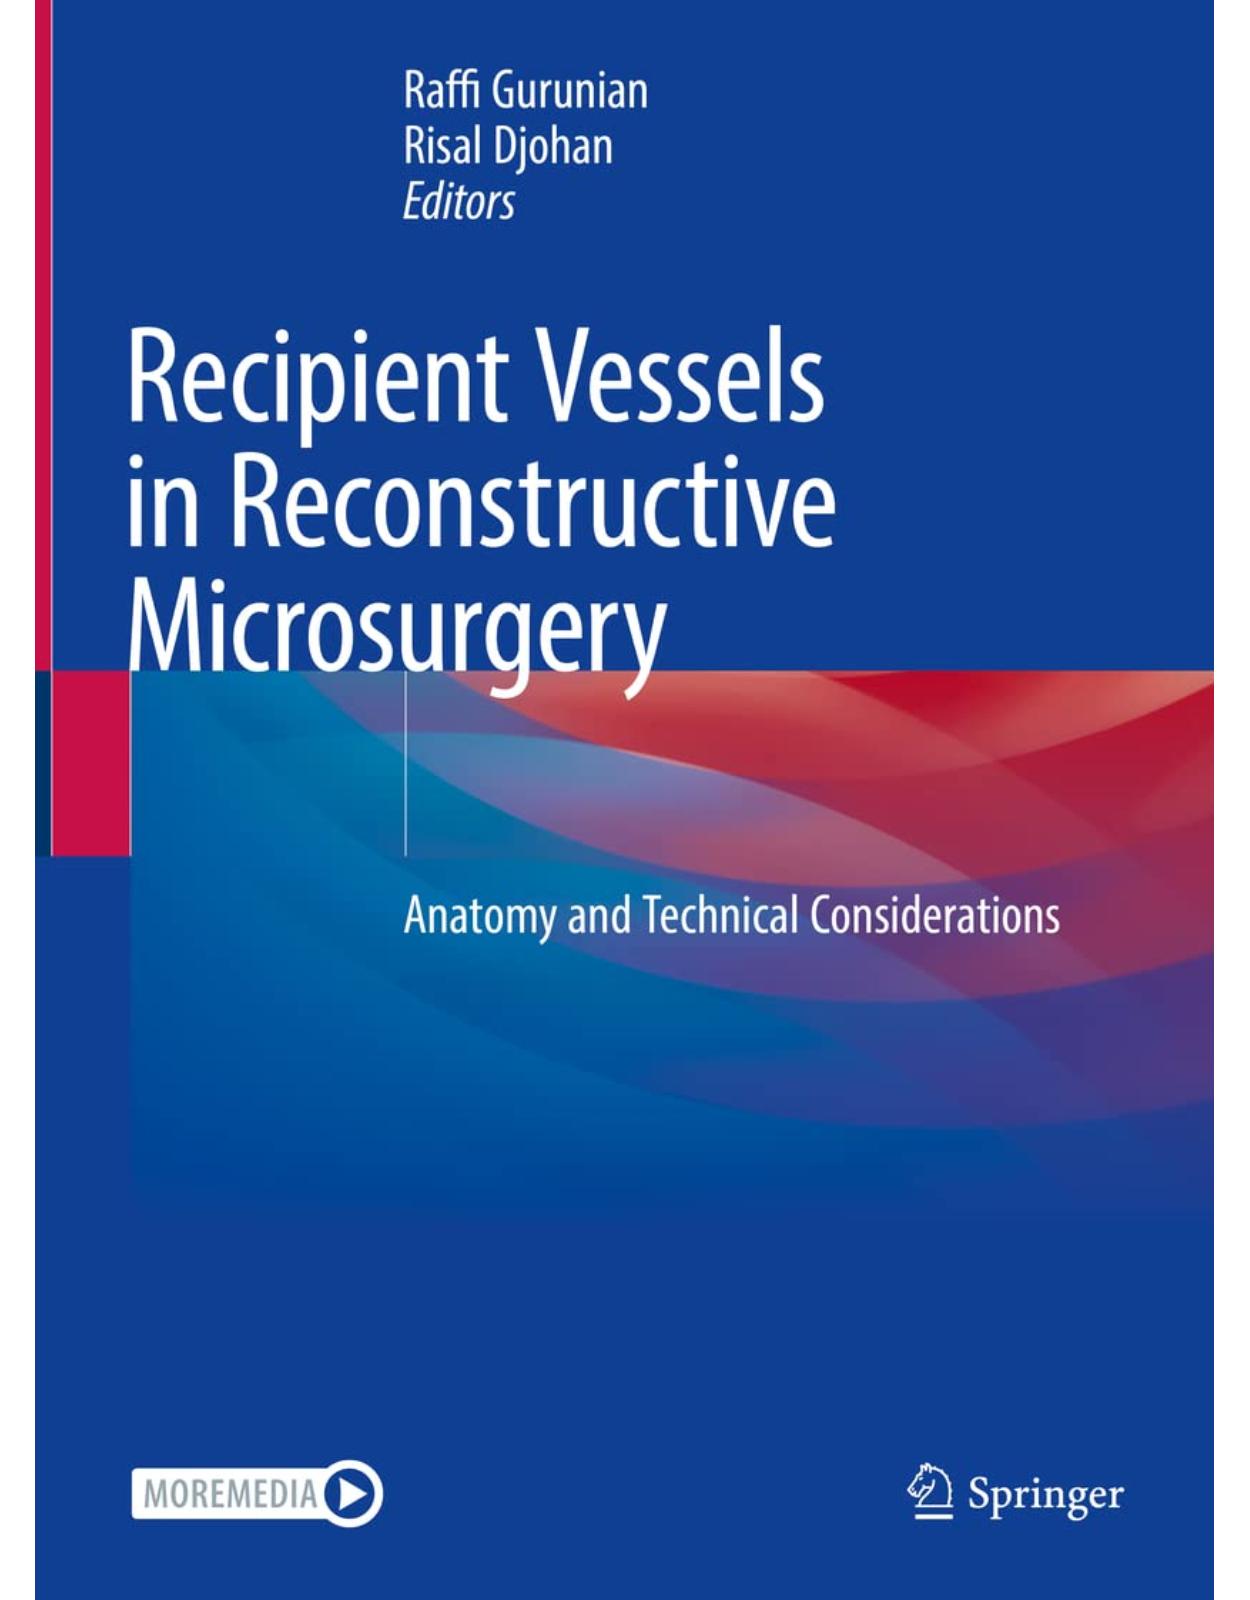 Recipient Vessels in Reconstructive Microsurgery: Anatomy and Technical Considerations